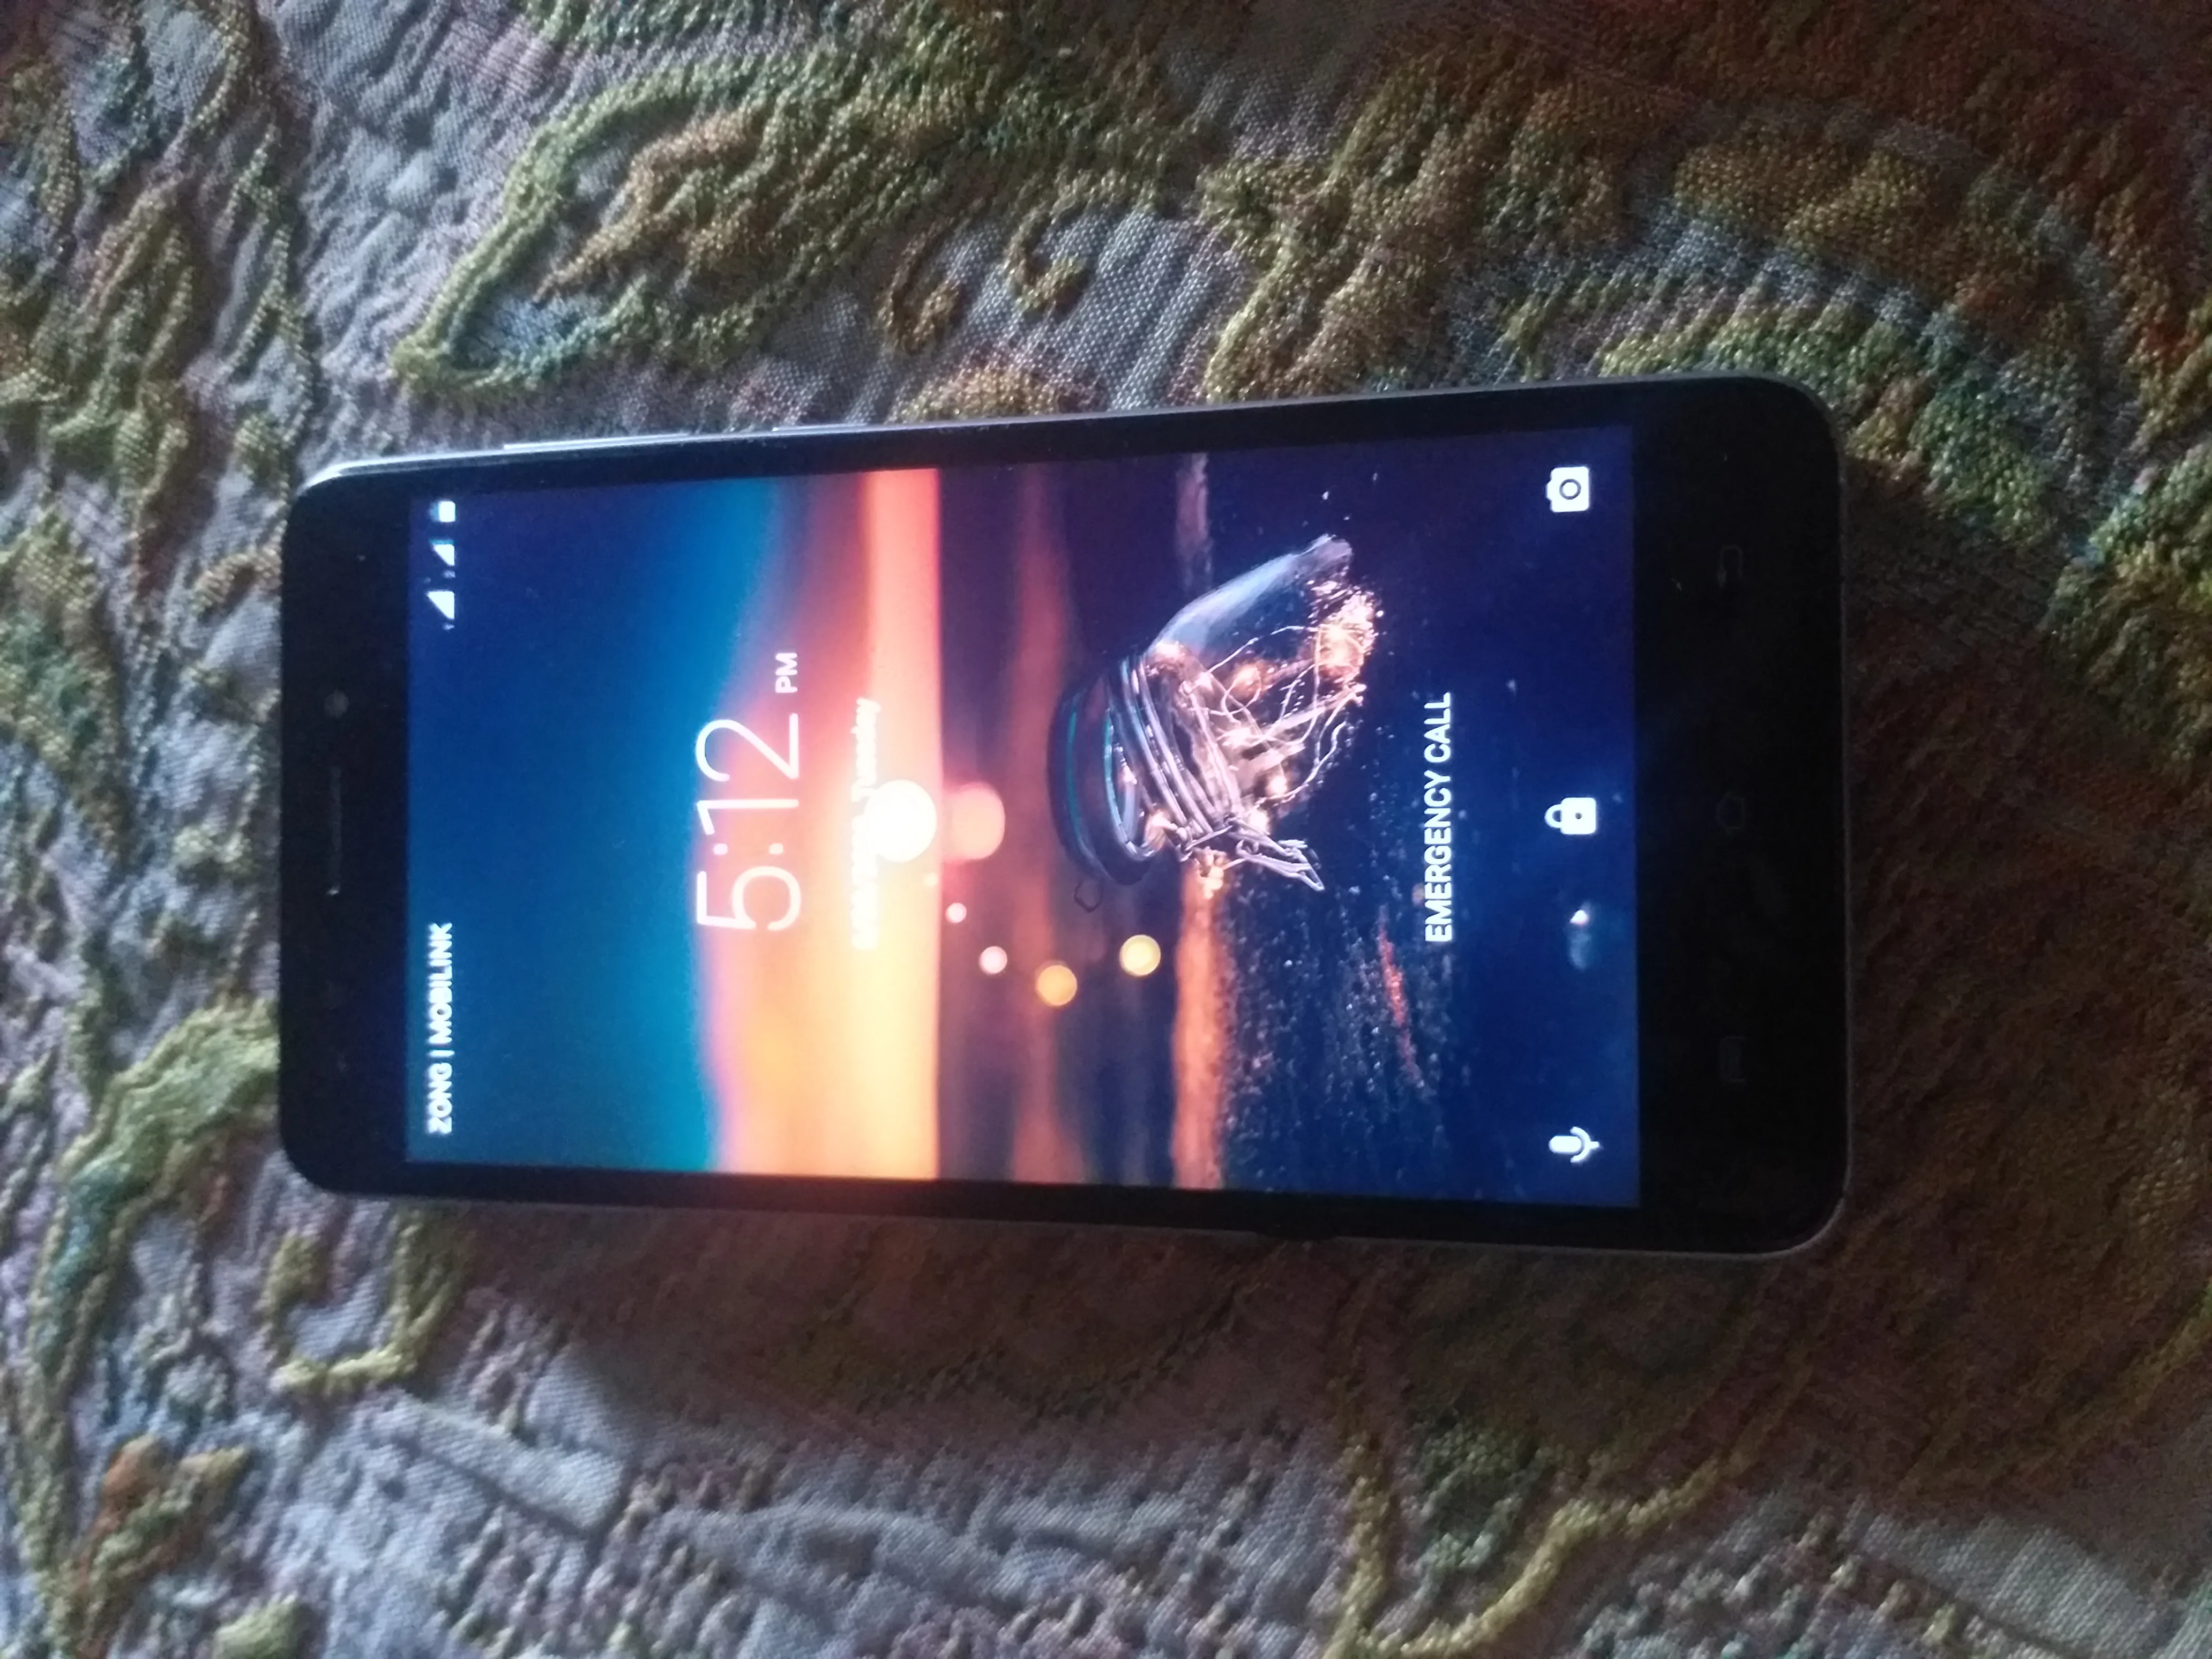 Lava iris 870 for sale and exchang with good phone - photo 1